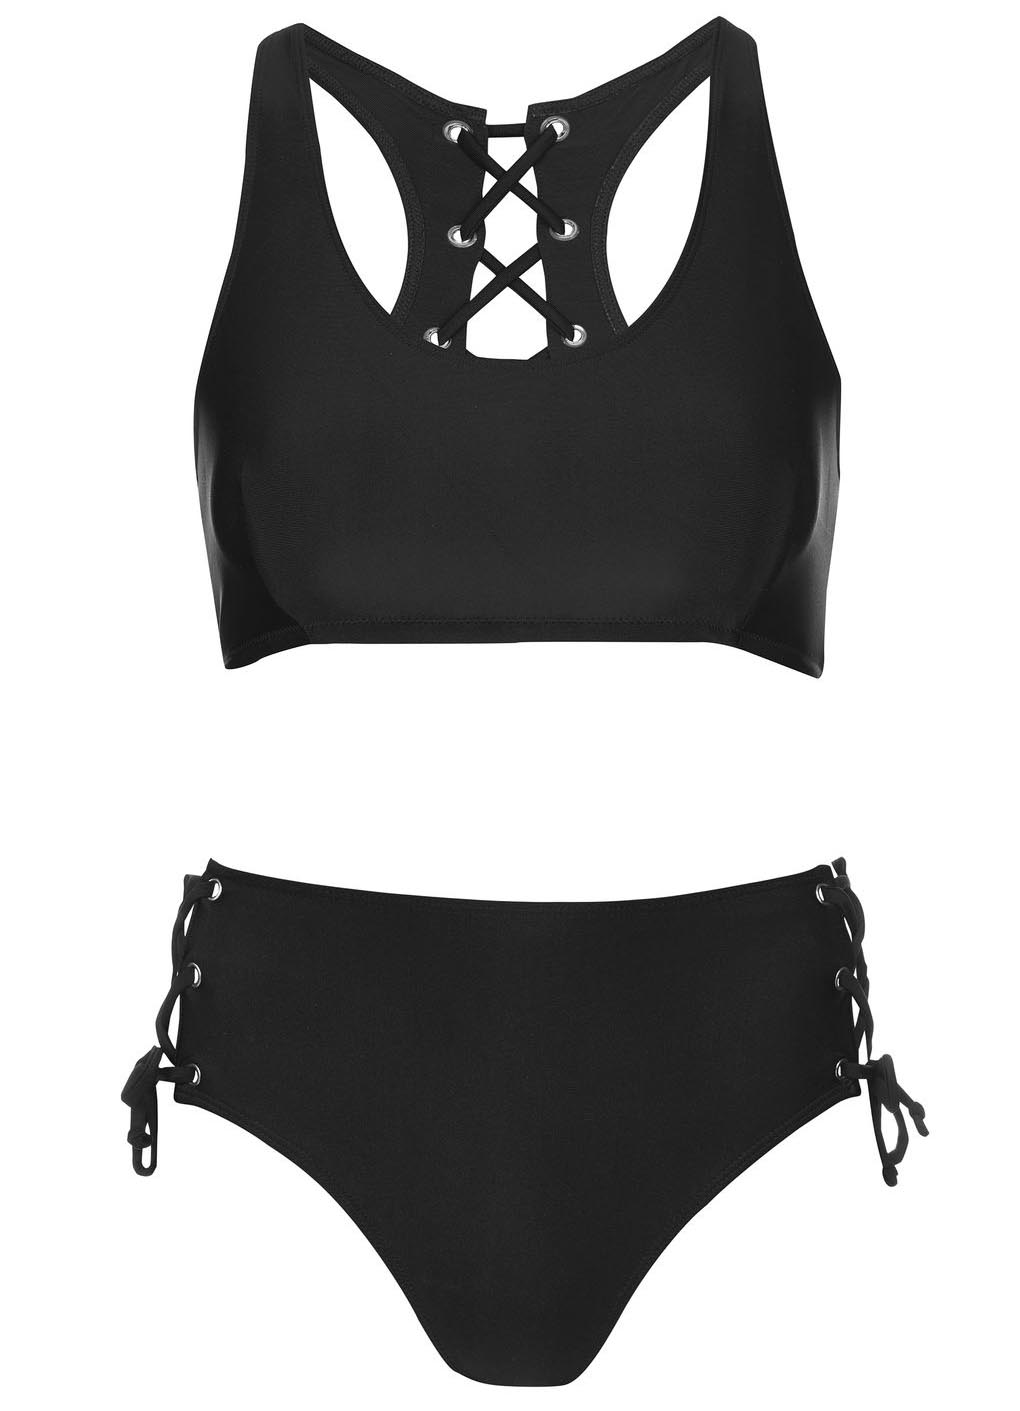 Goths in Hot Weather.... 15 Must-Have Swimsuits that will Rock Your Summer - Swim Noir - Gothic Swimwear - Black Lace-up Bikini - Topshop - www.MeandAnnabelLee - Blog for all things Dark & Weird